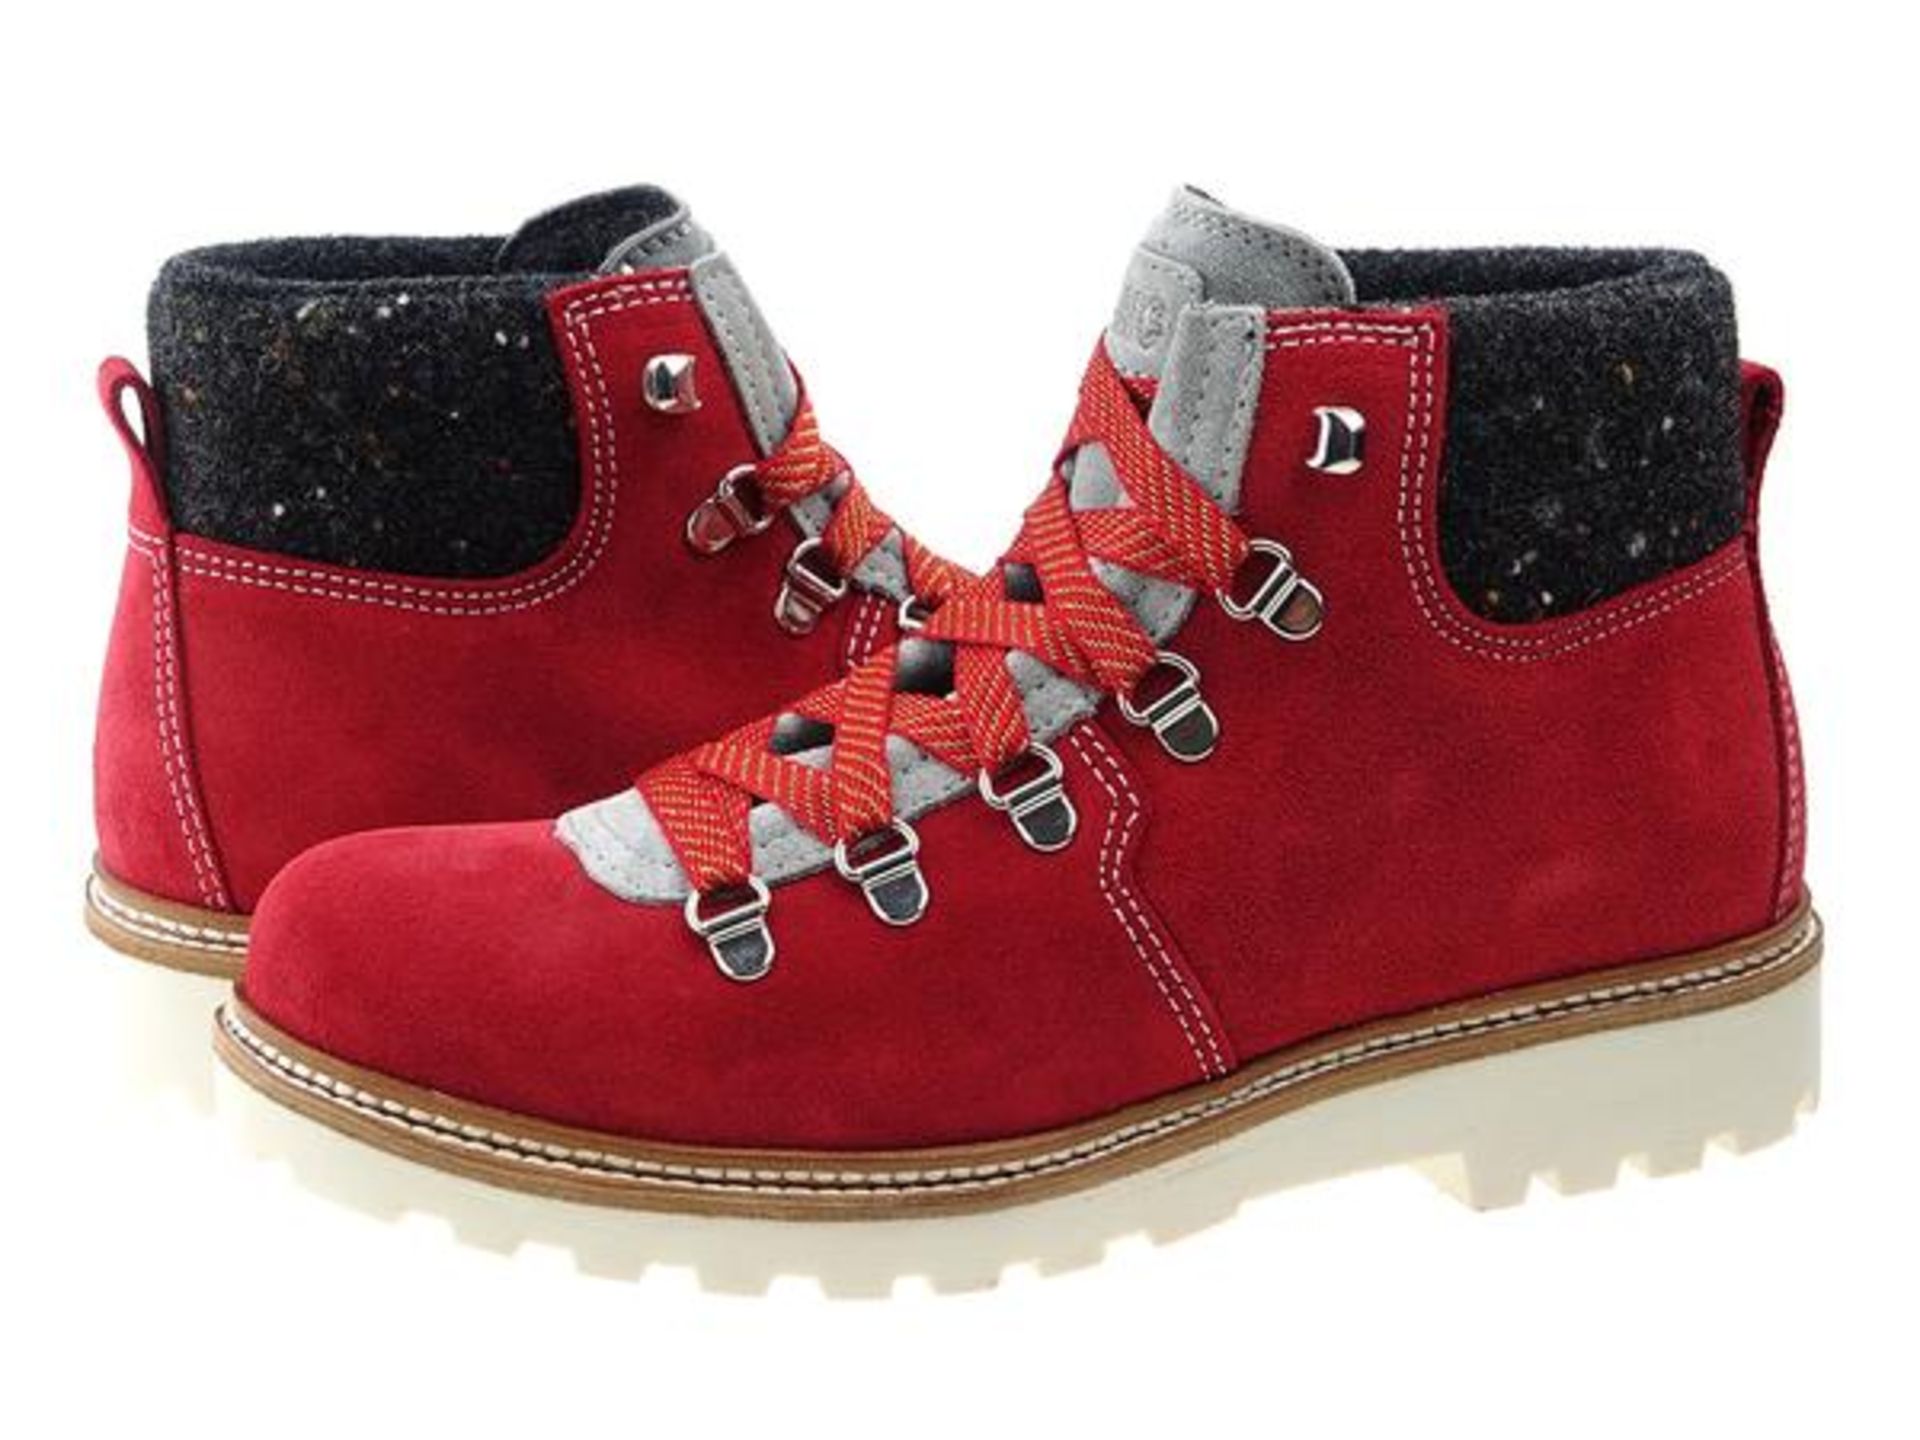 1 x Pair of Designer Olang Merano BTX 815 Rosso Women's Winter Boots - Euro Size 40 - Brand New - Image 3 of 4